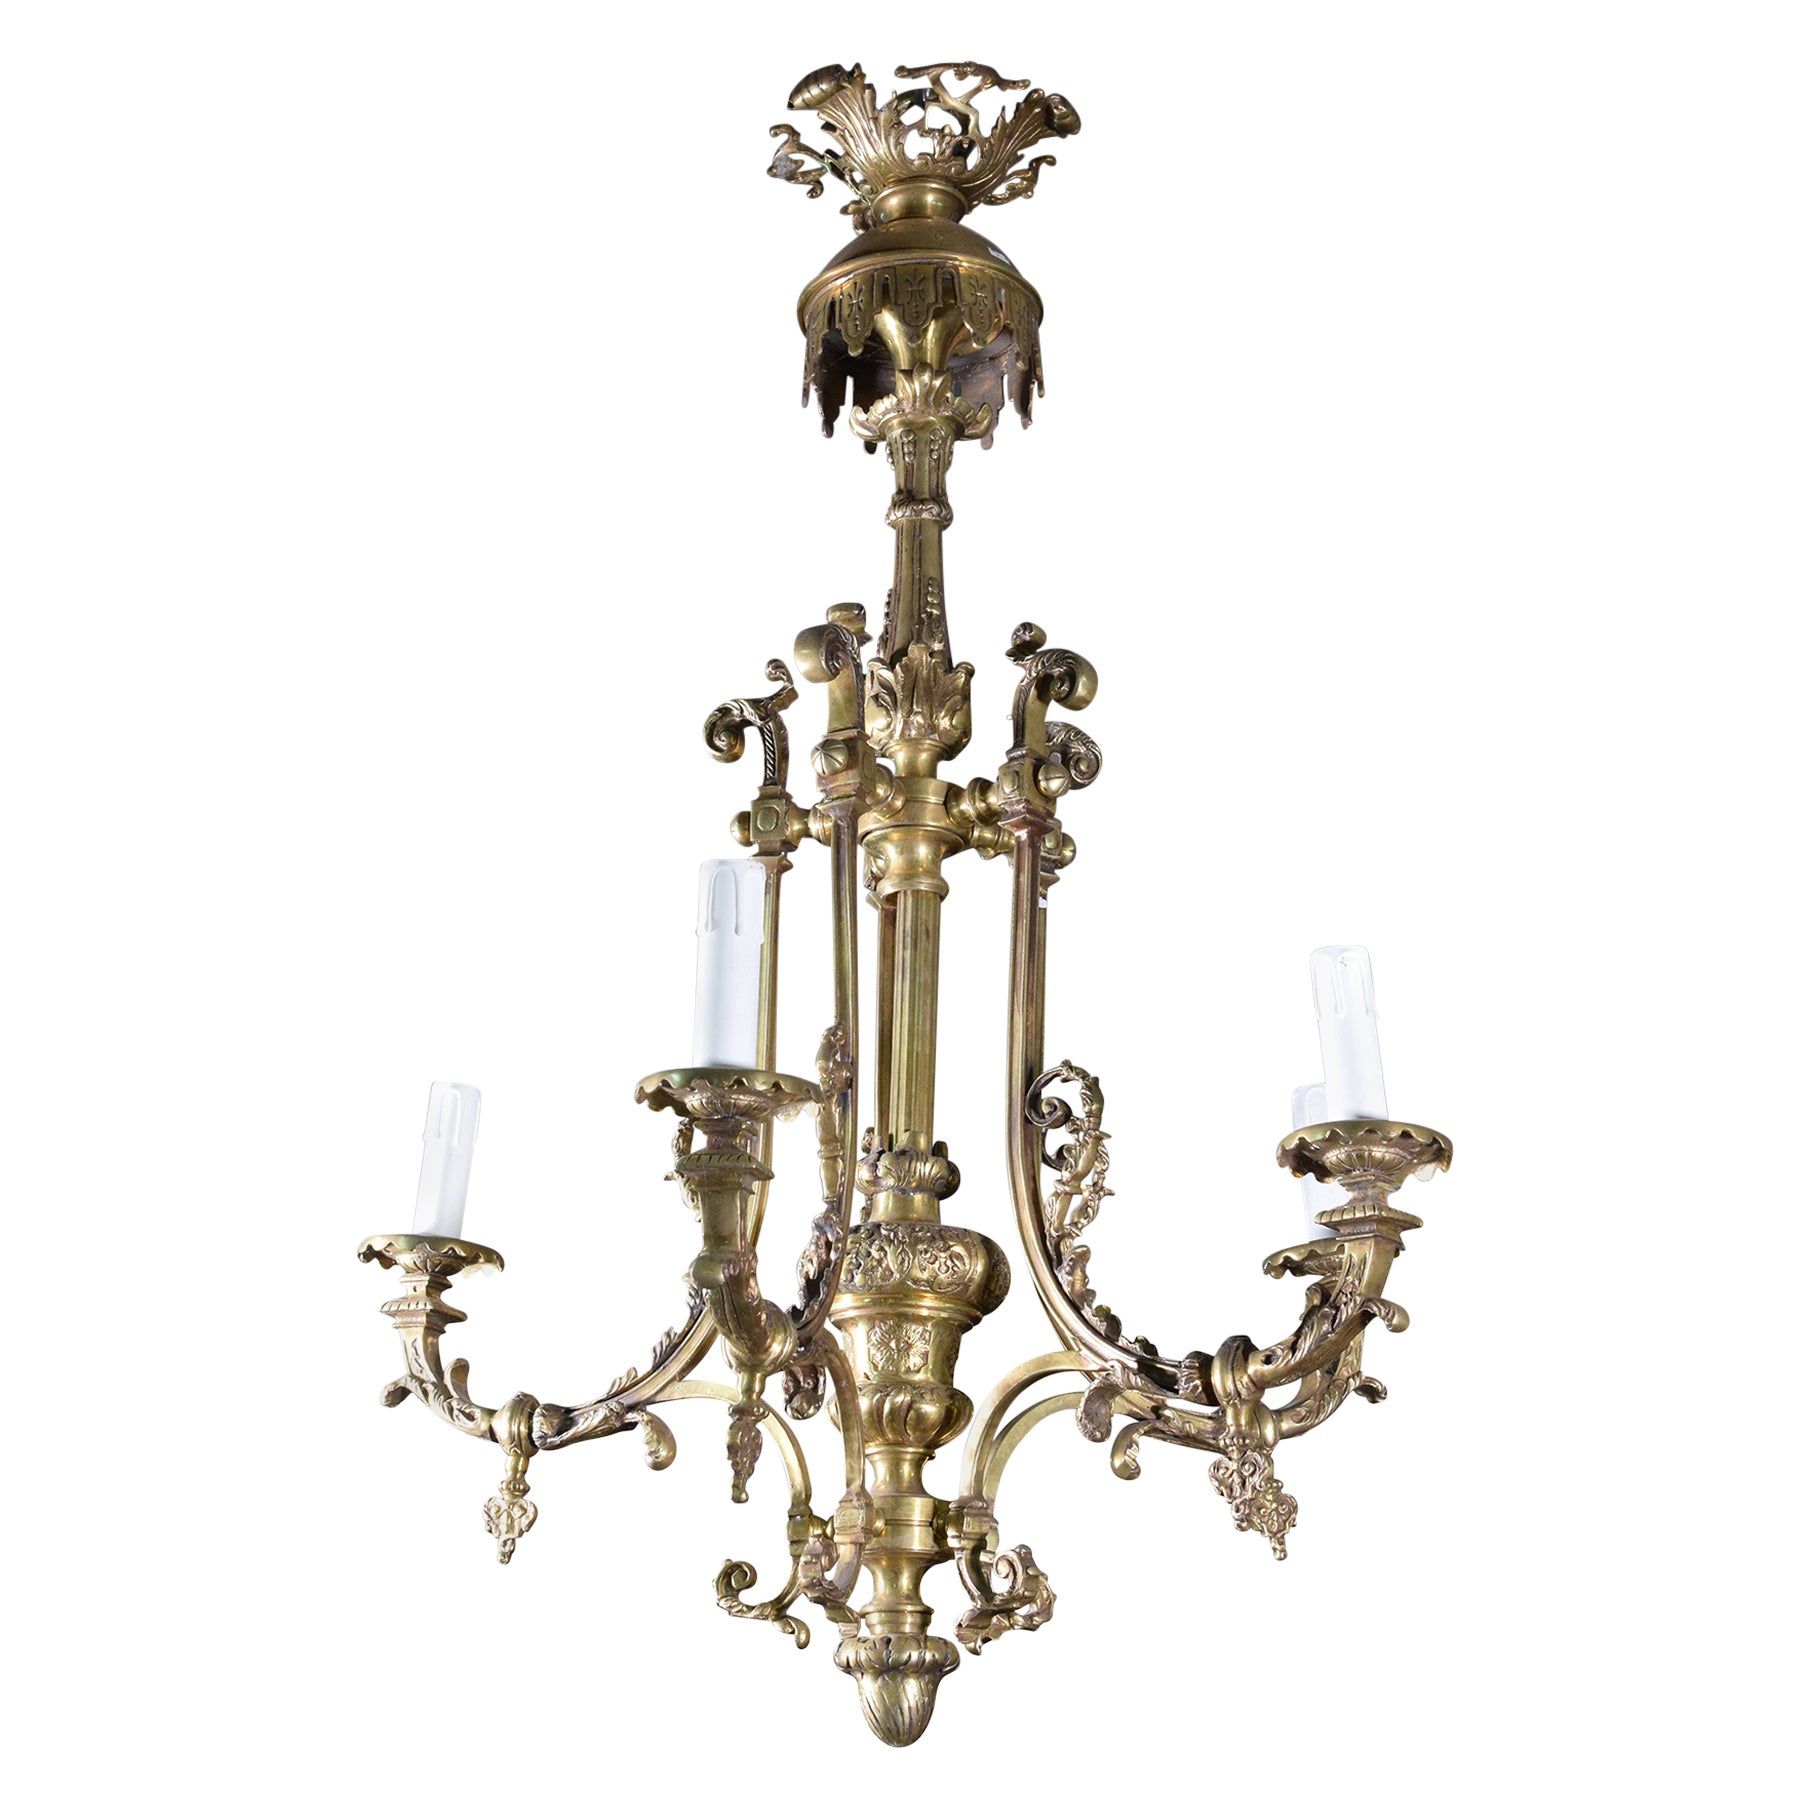 Ceiling lamp with six lights. Bronze with antique finish and glass. 